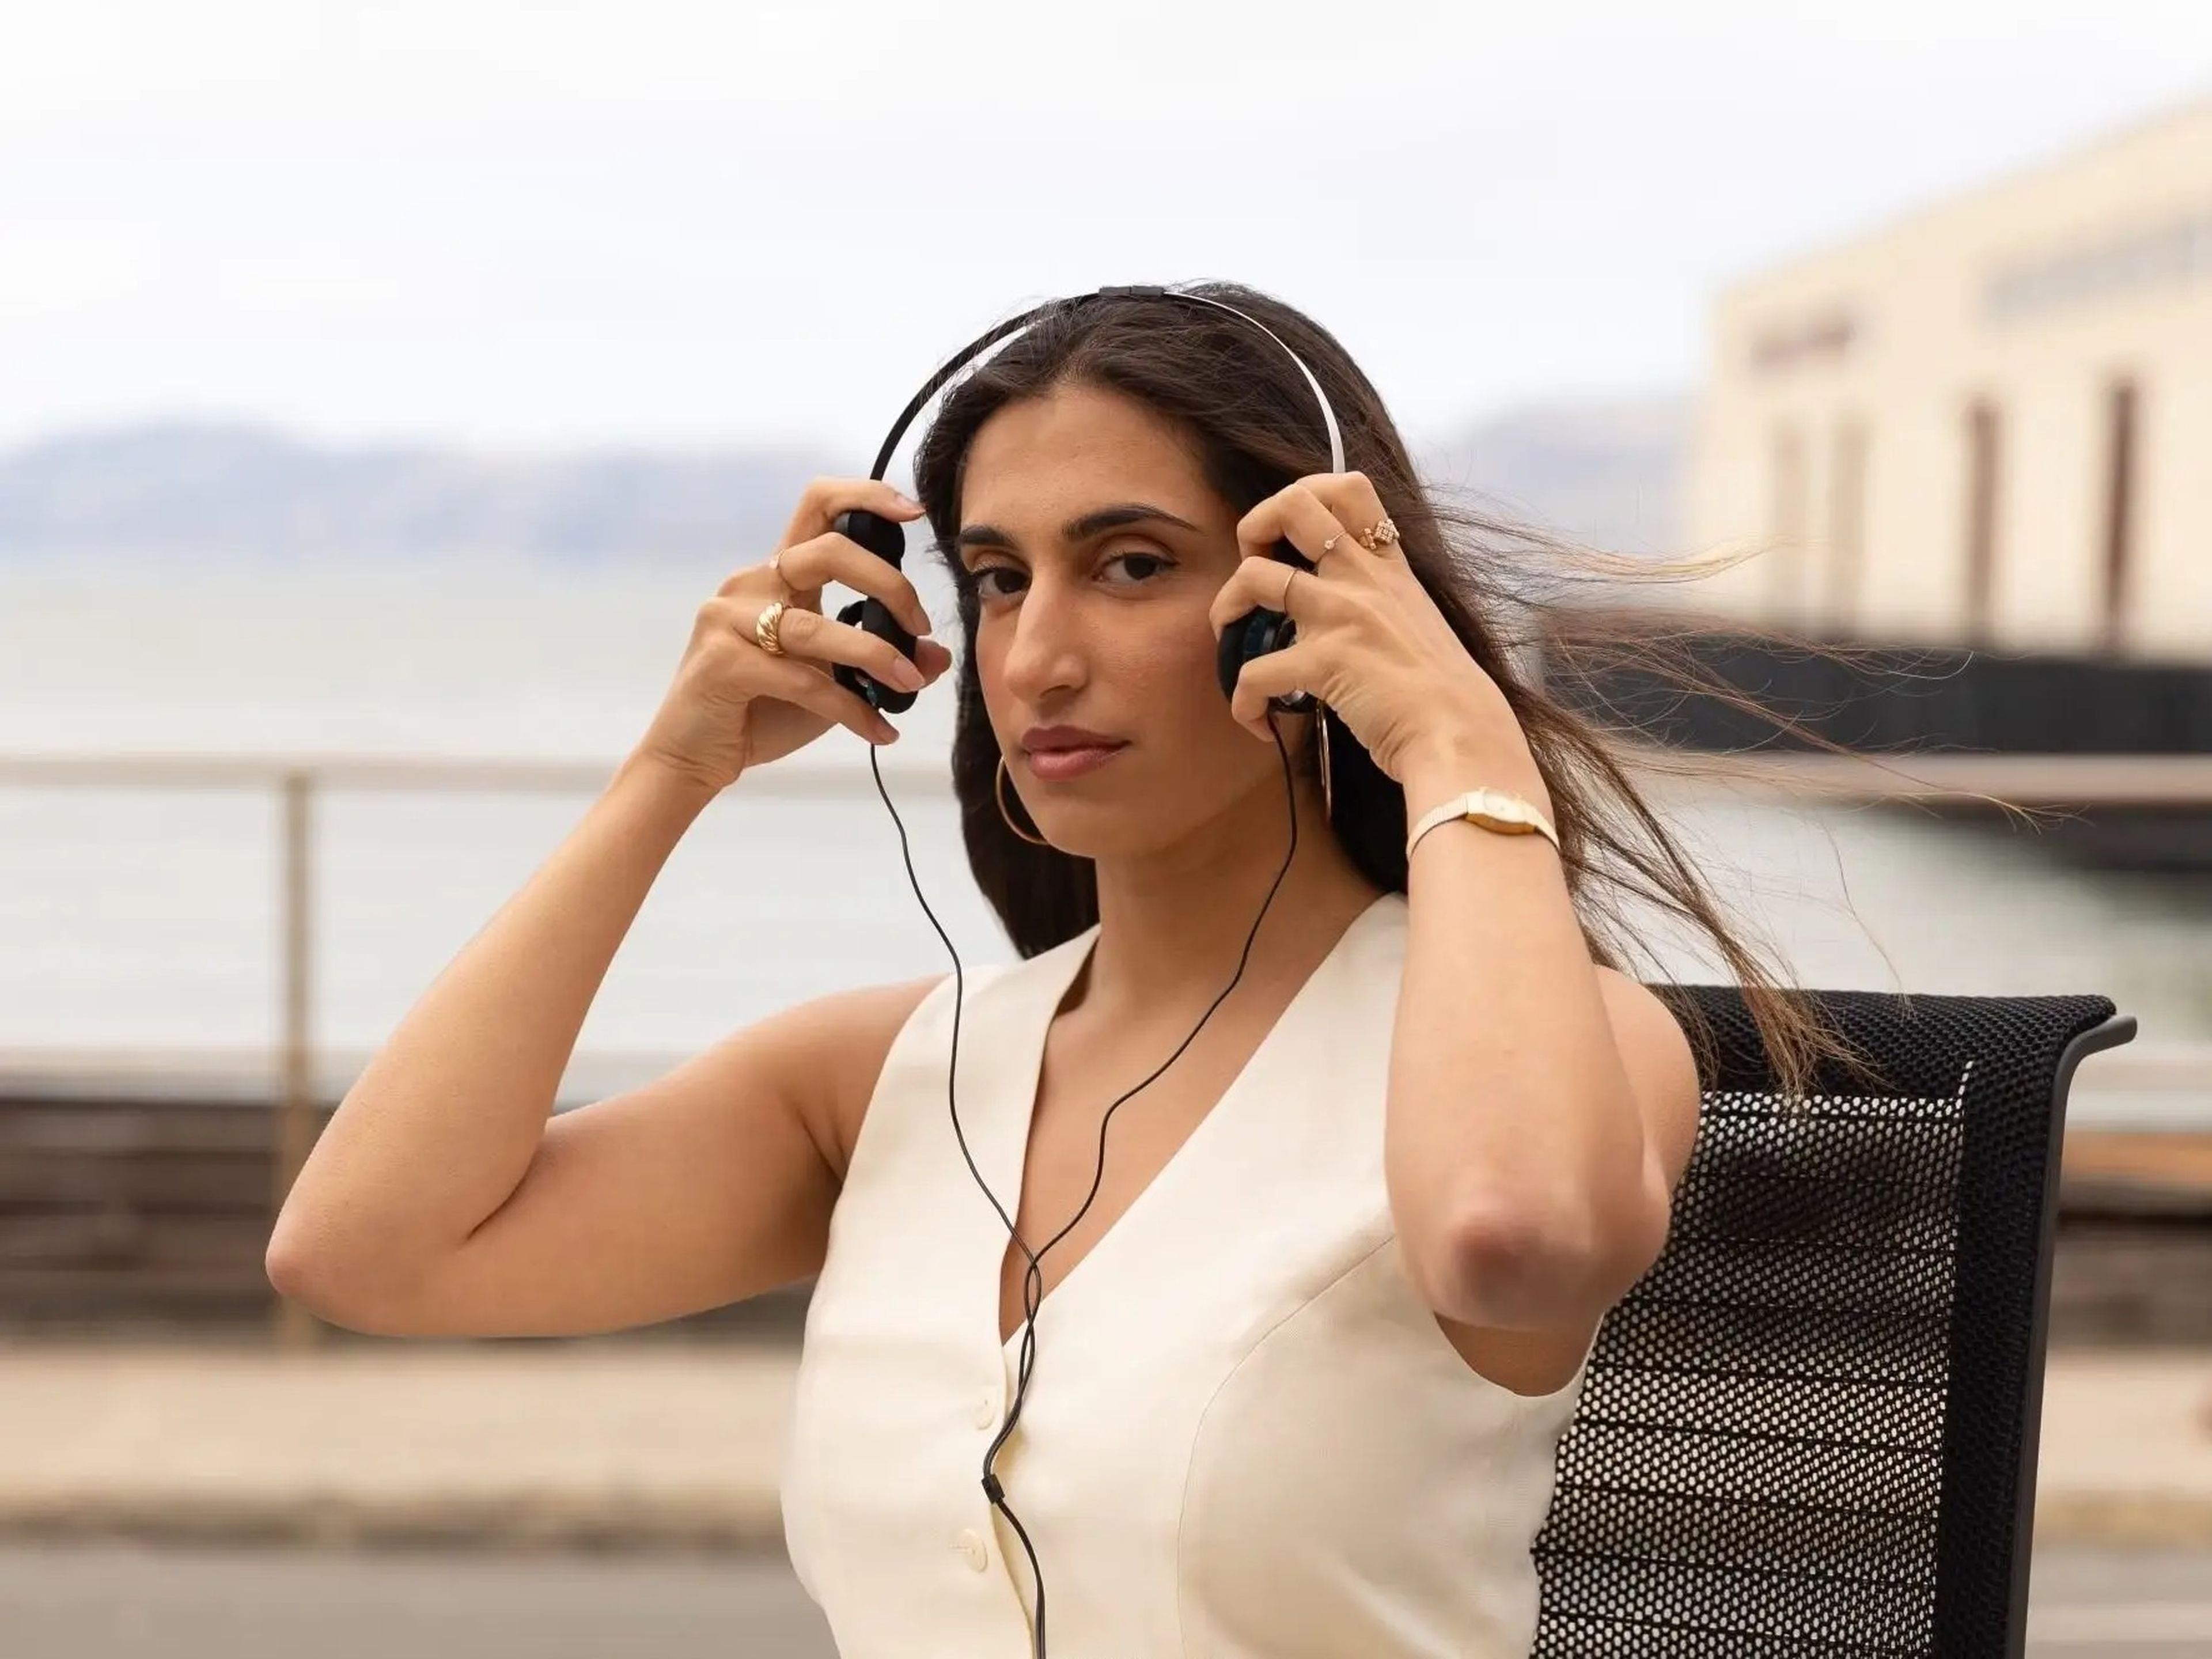 Avni Barman is wearing a white top while she looks at the camera and puts a pair of headphones on.